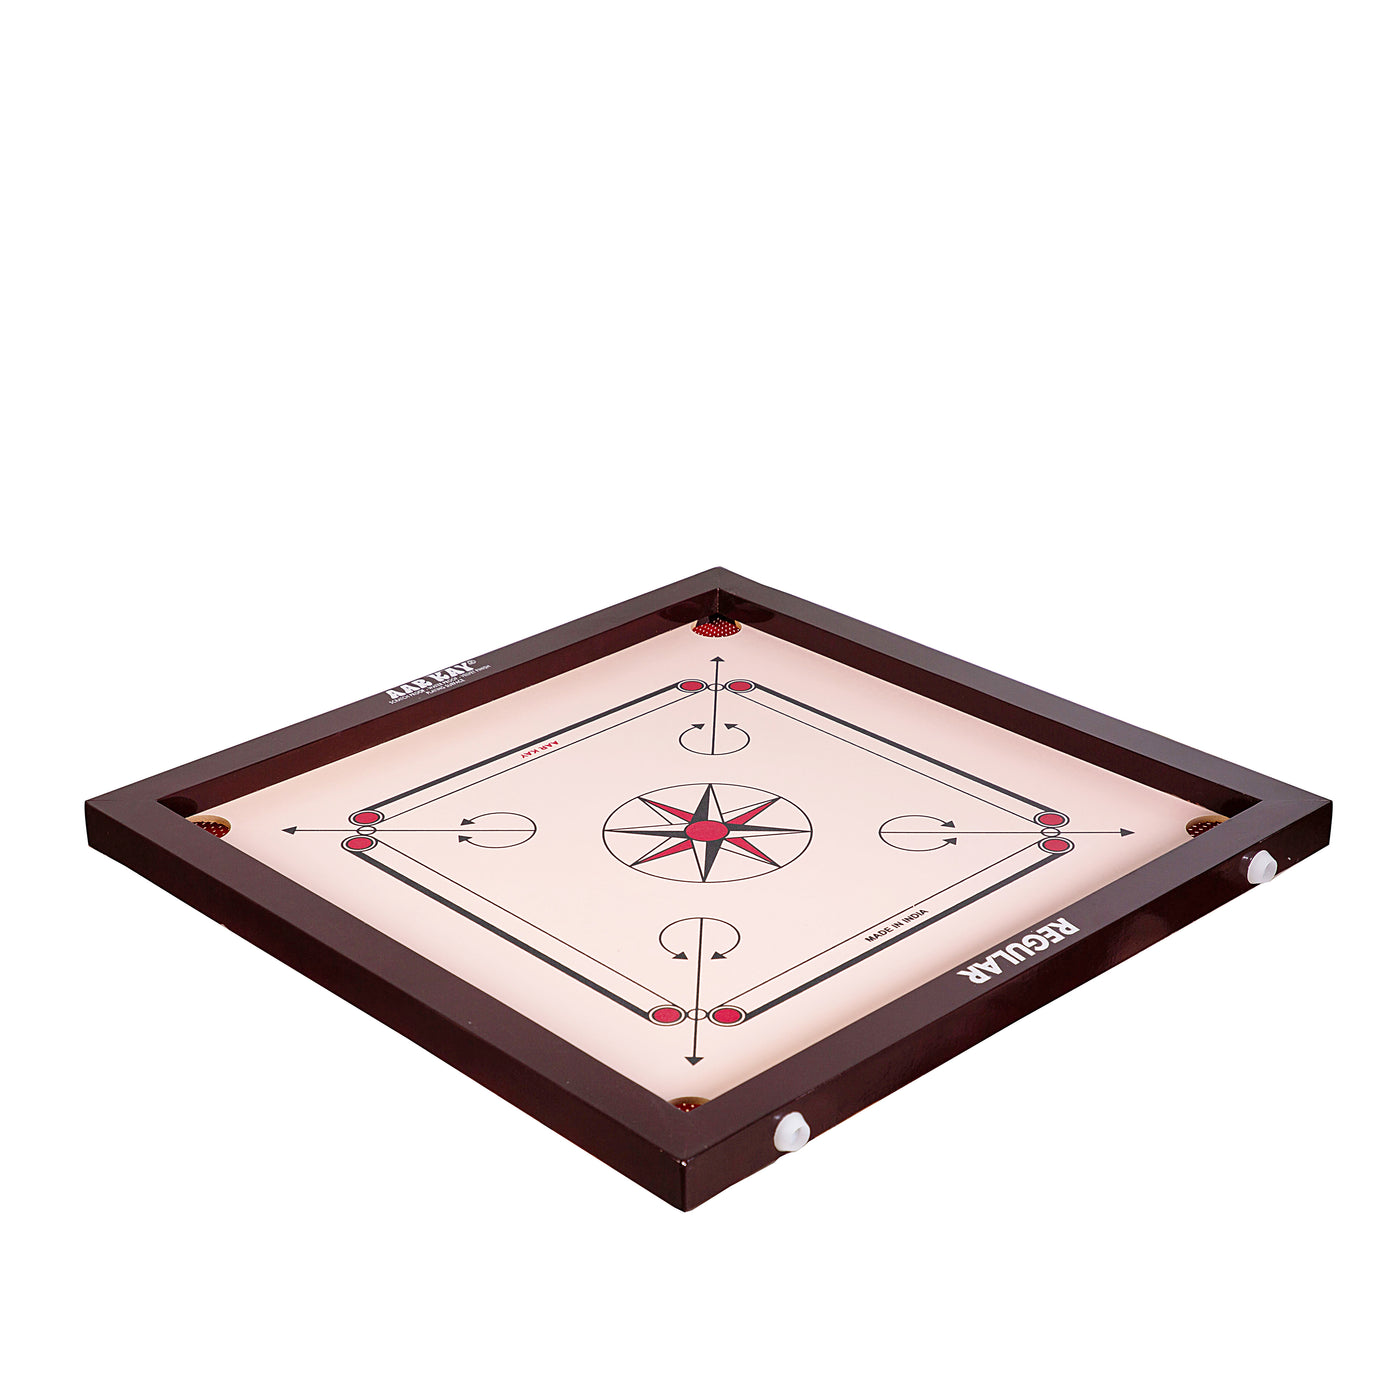 aarkay 24 inch wooden carrom board game red brown